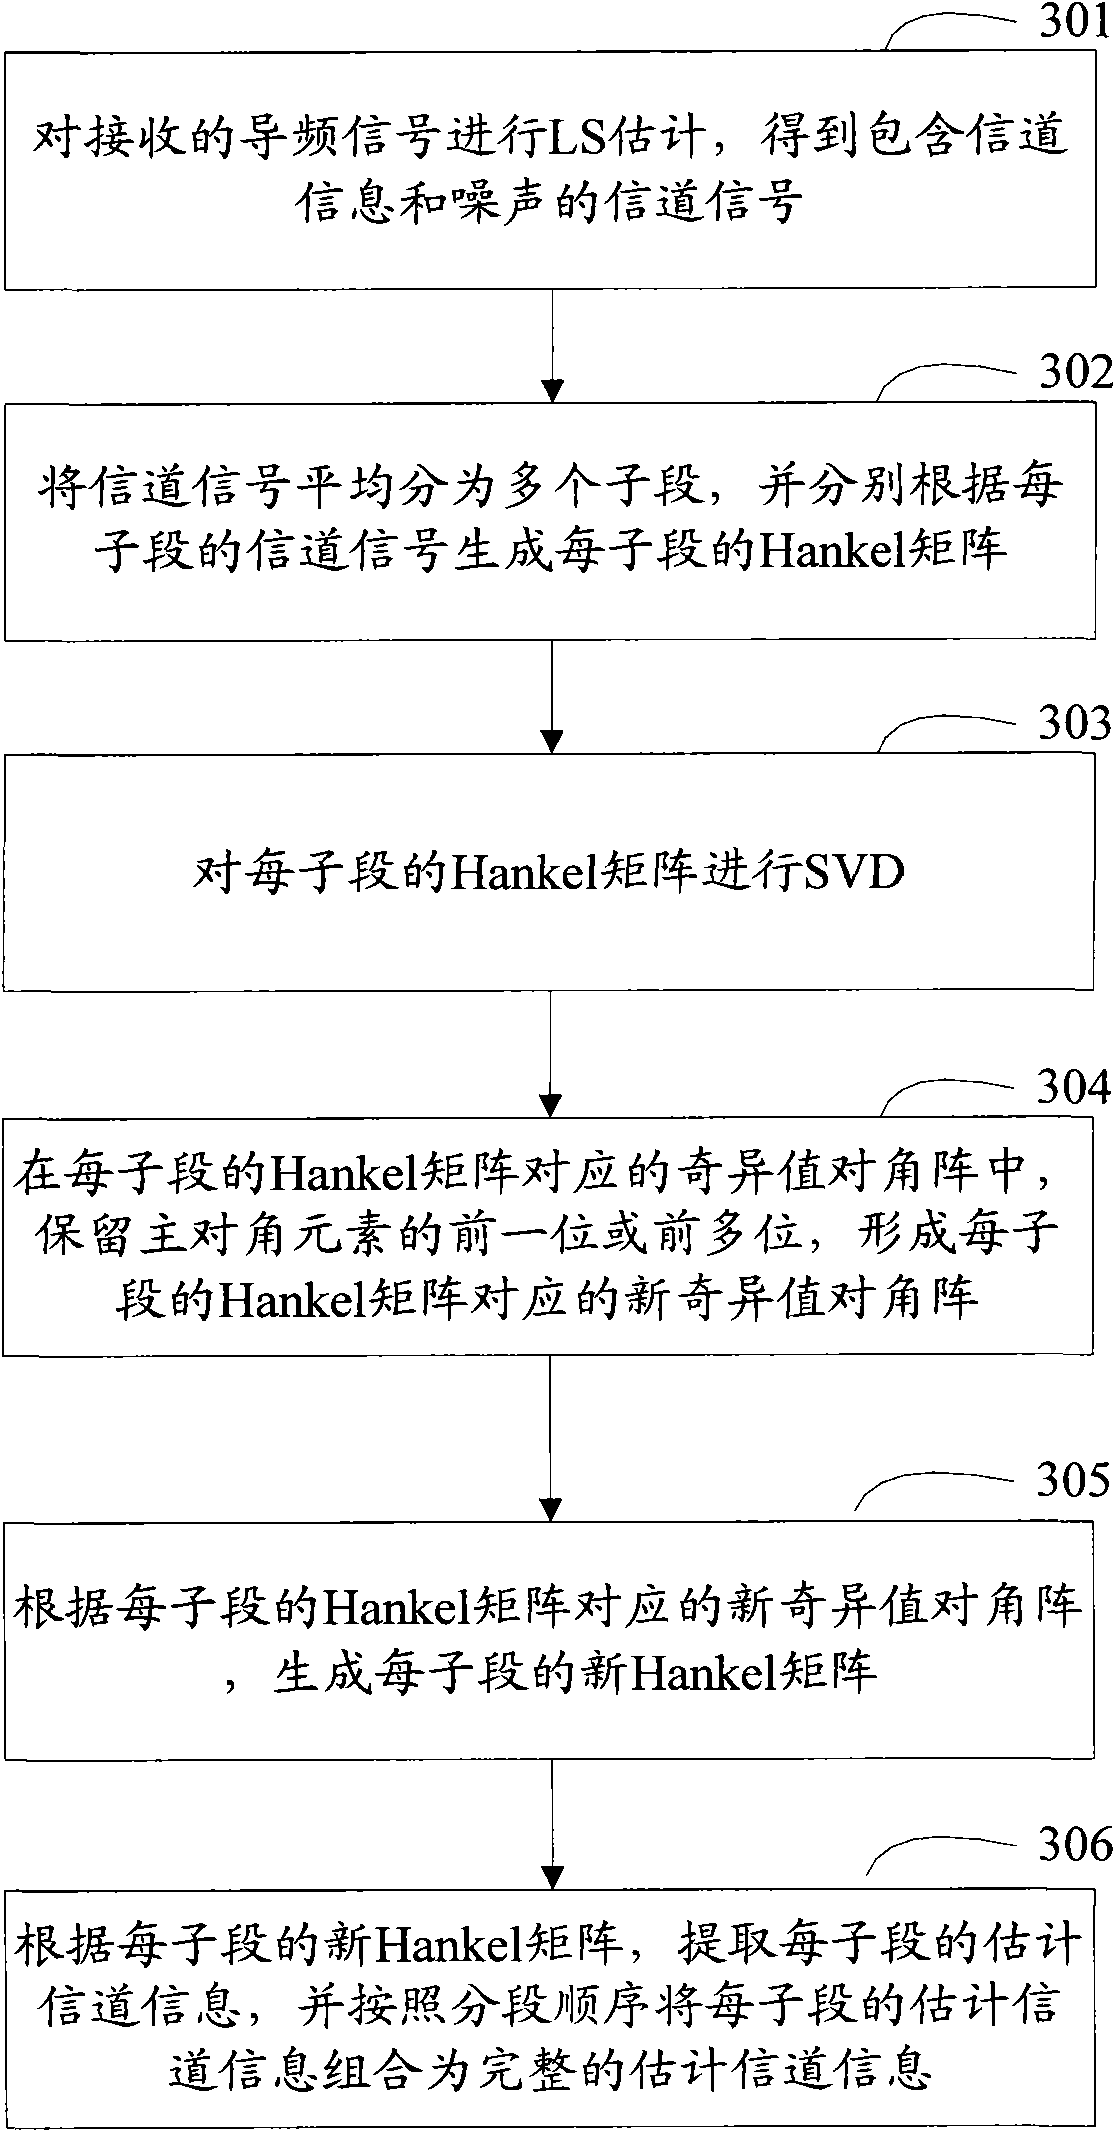 Channel estimation method of OFDM (orthogonal frequency division multiplexing) system